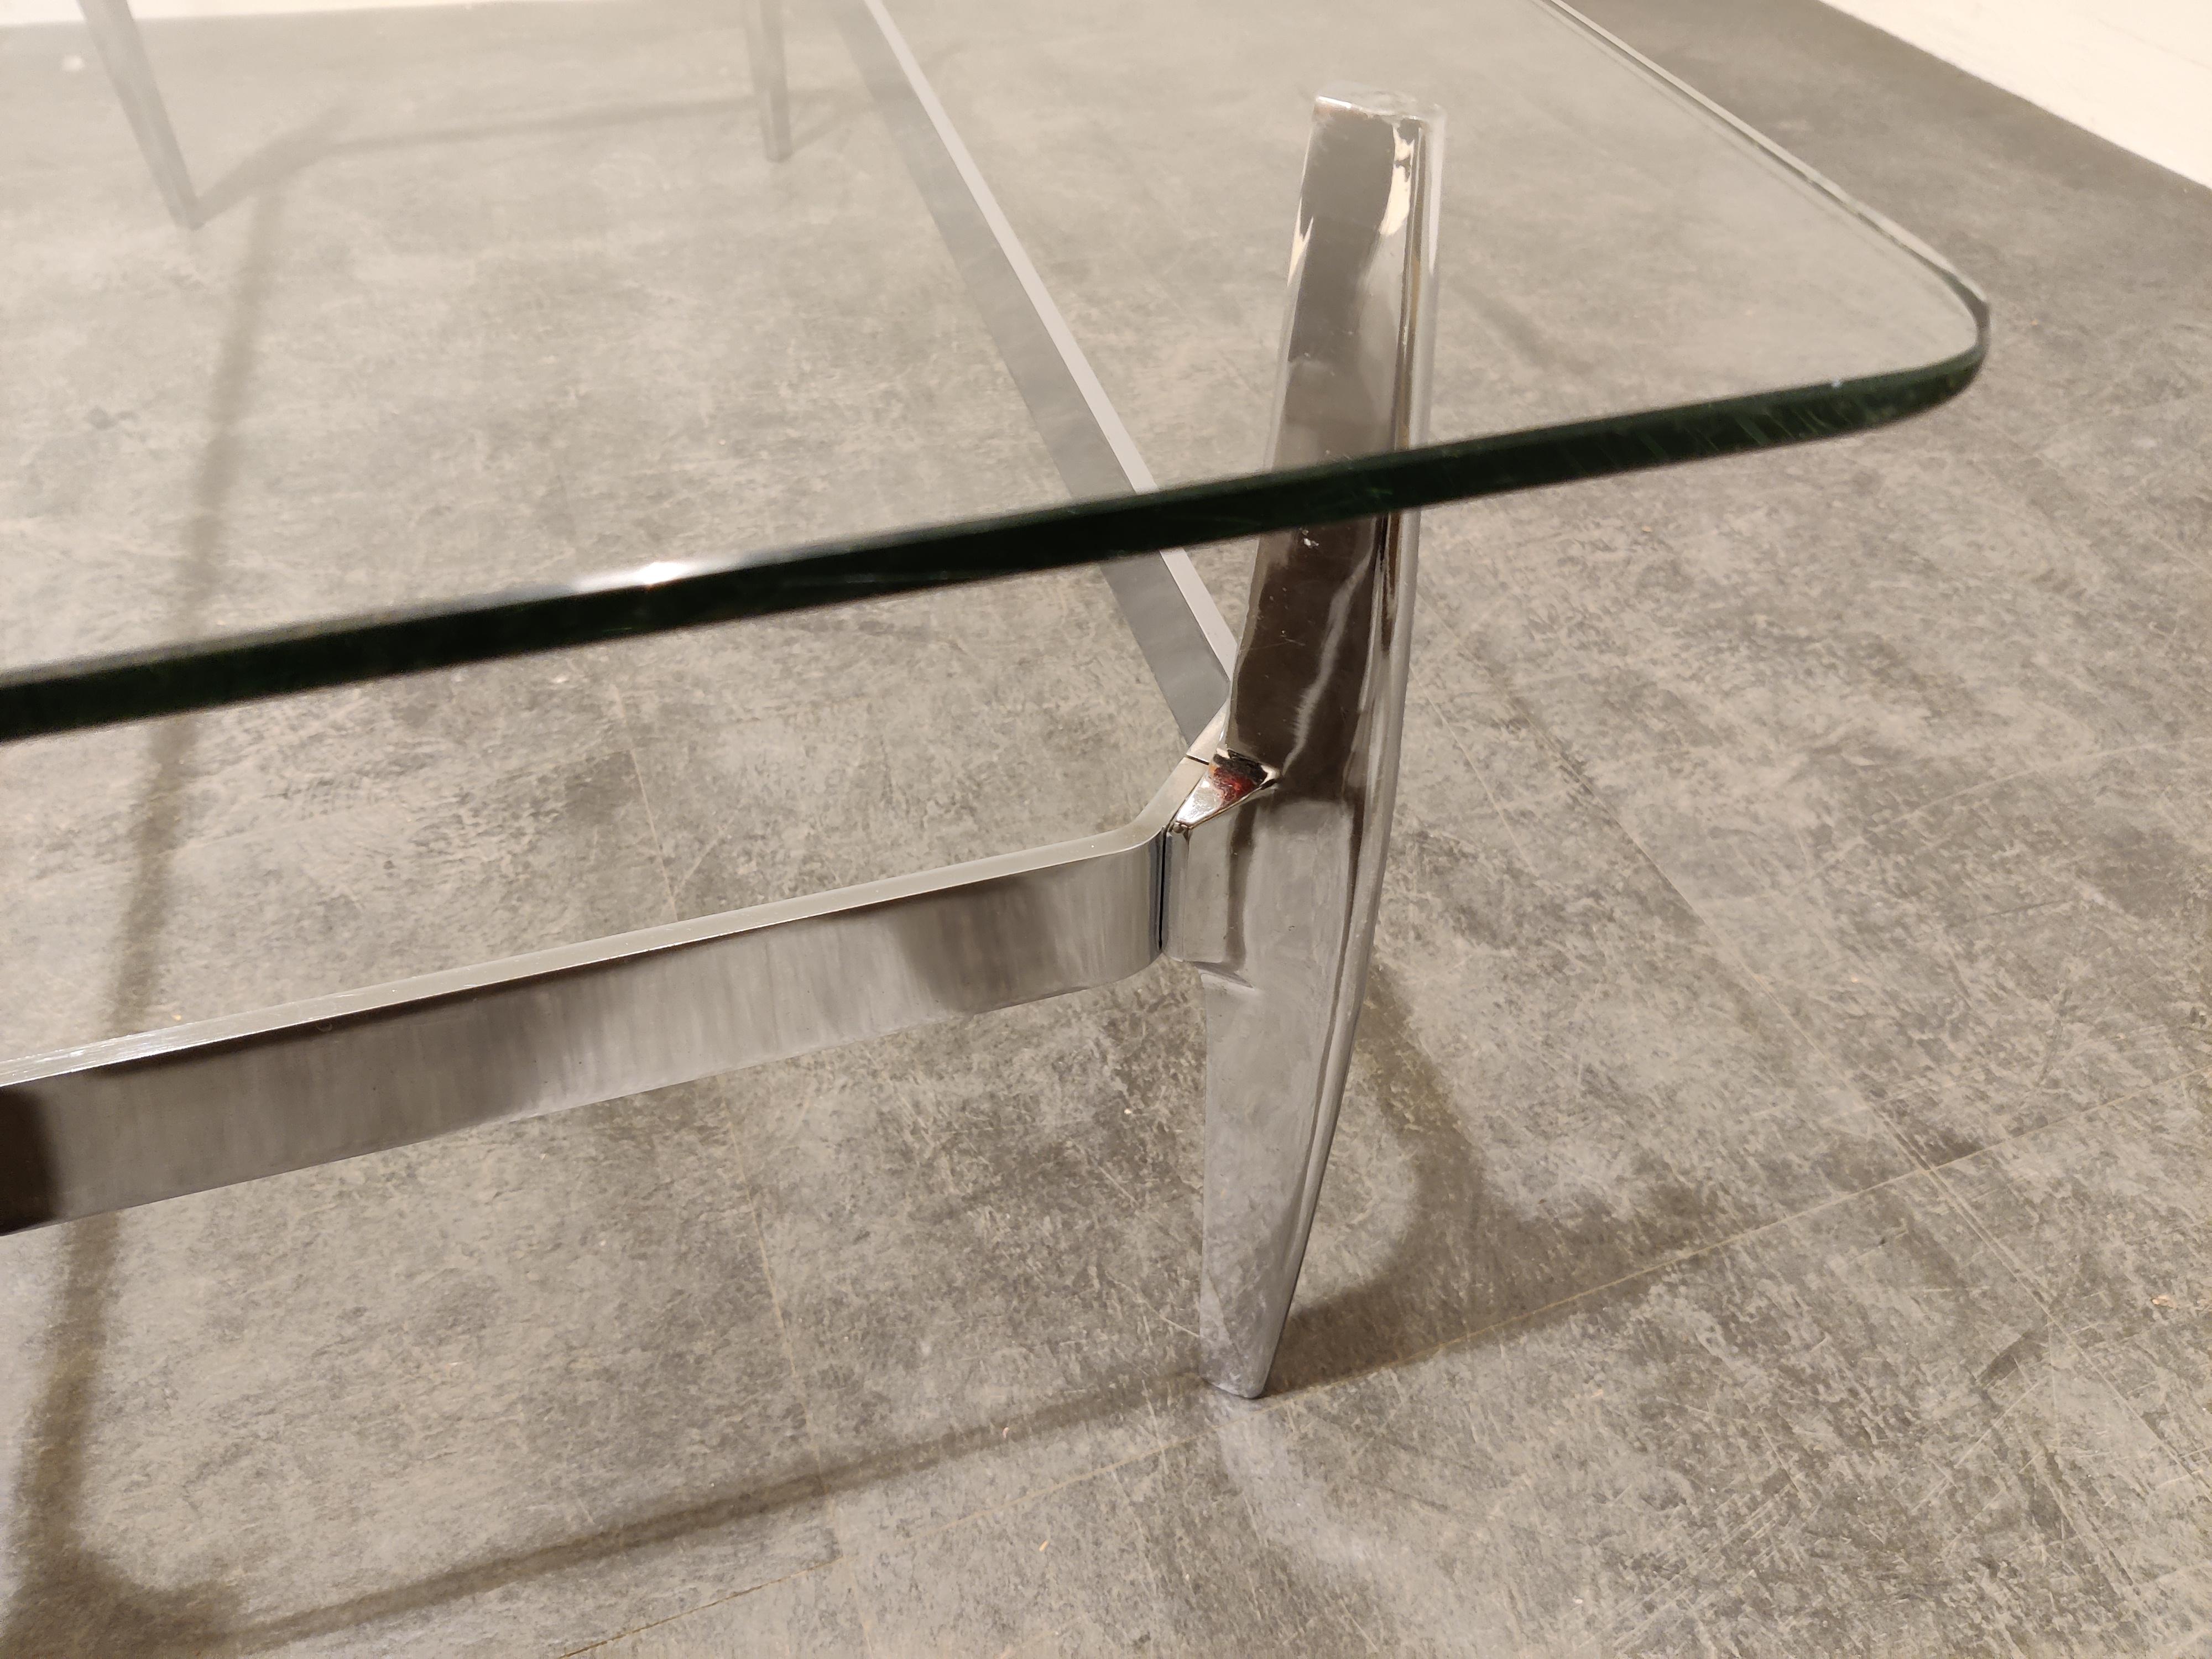 Rare model mid century chromed steel coffee table by Knut Hesterberg for Ronald Schmitt.

The table has a clear glass top with a finely crafte sculptural schromed steel base.

Timeless design.

Good condition.

1970s, Germany

Measures: